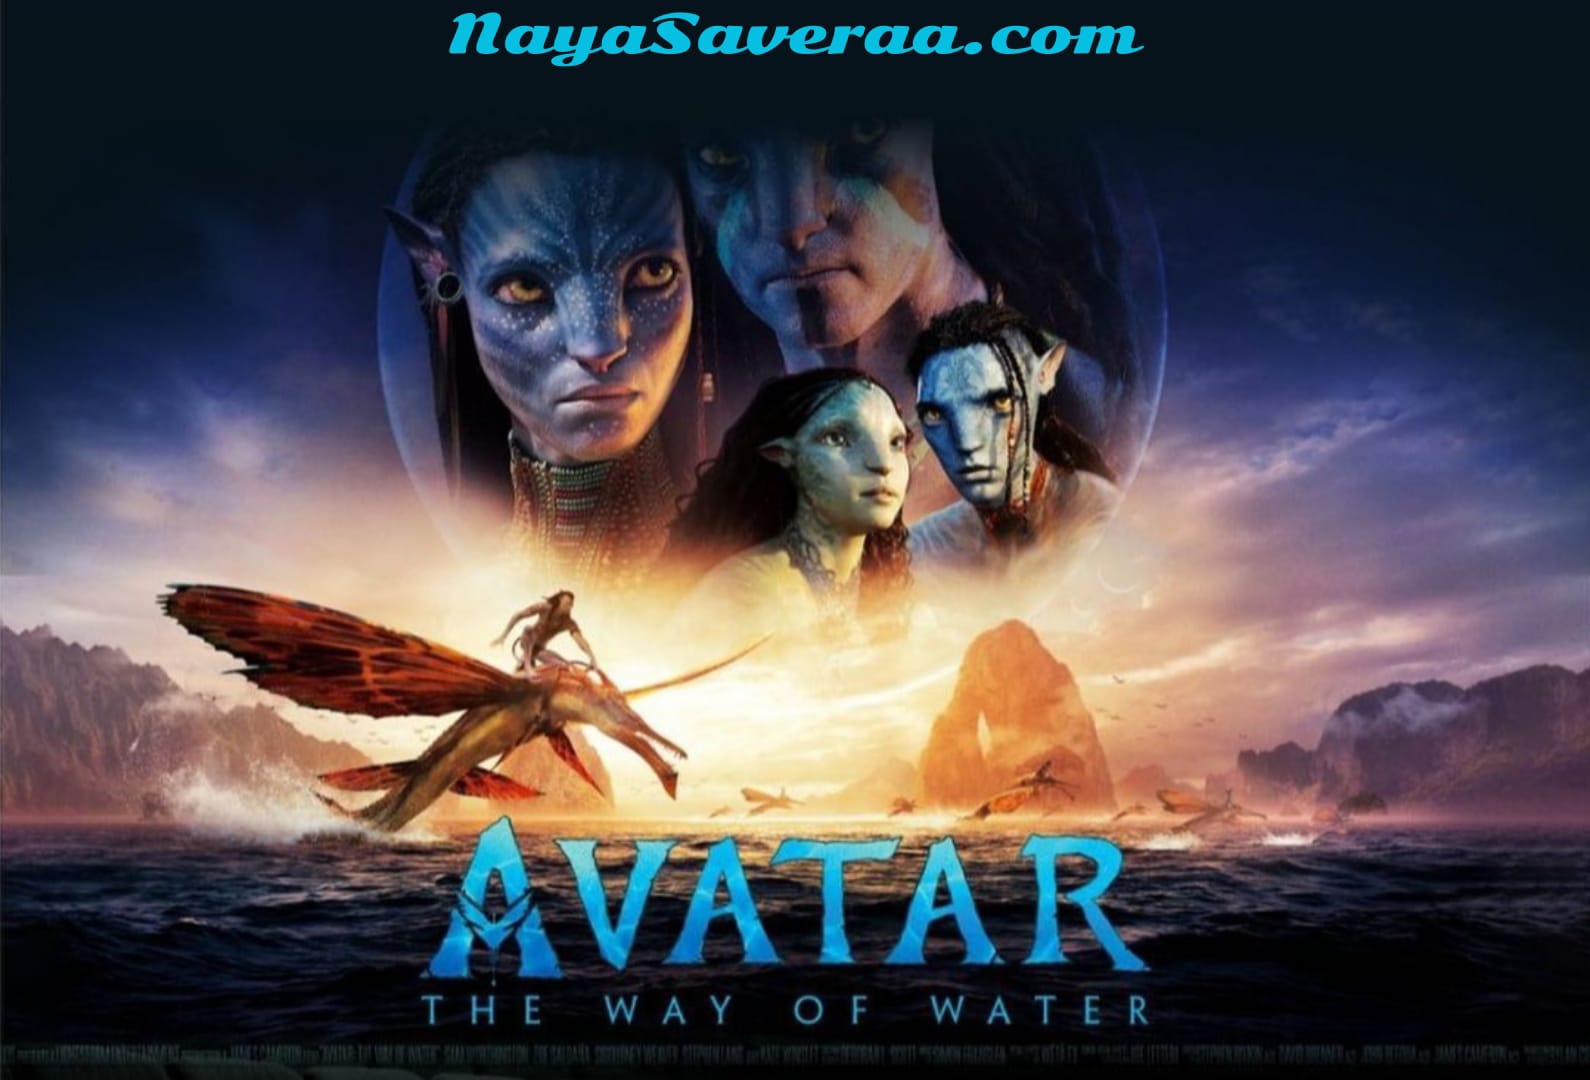 Avatar 2 Box Office Collection Day 1 (Early Mayhem): Record-breaking opening on screen